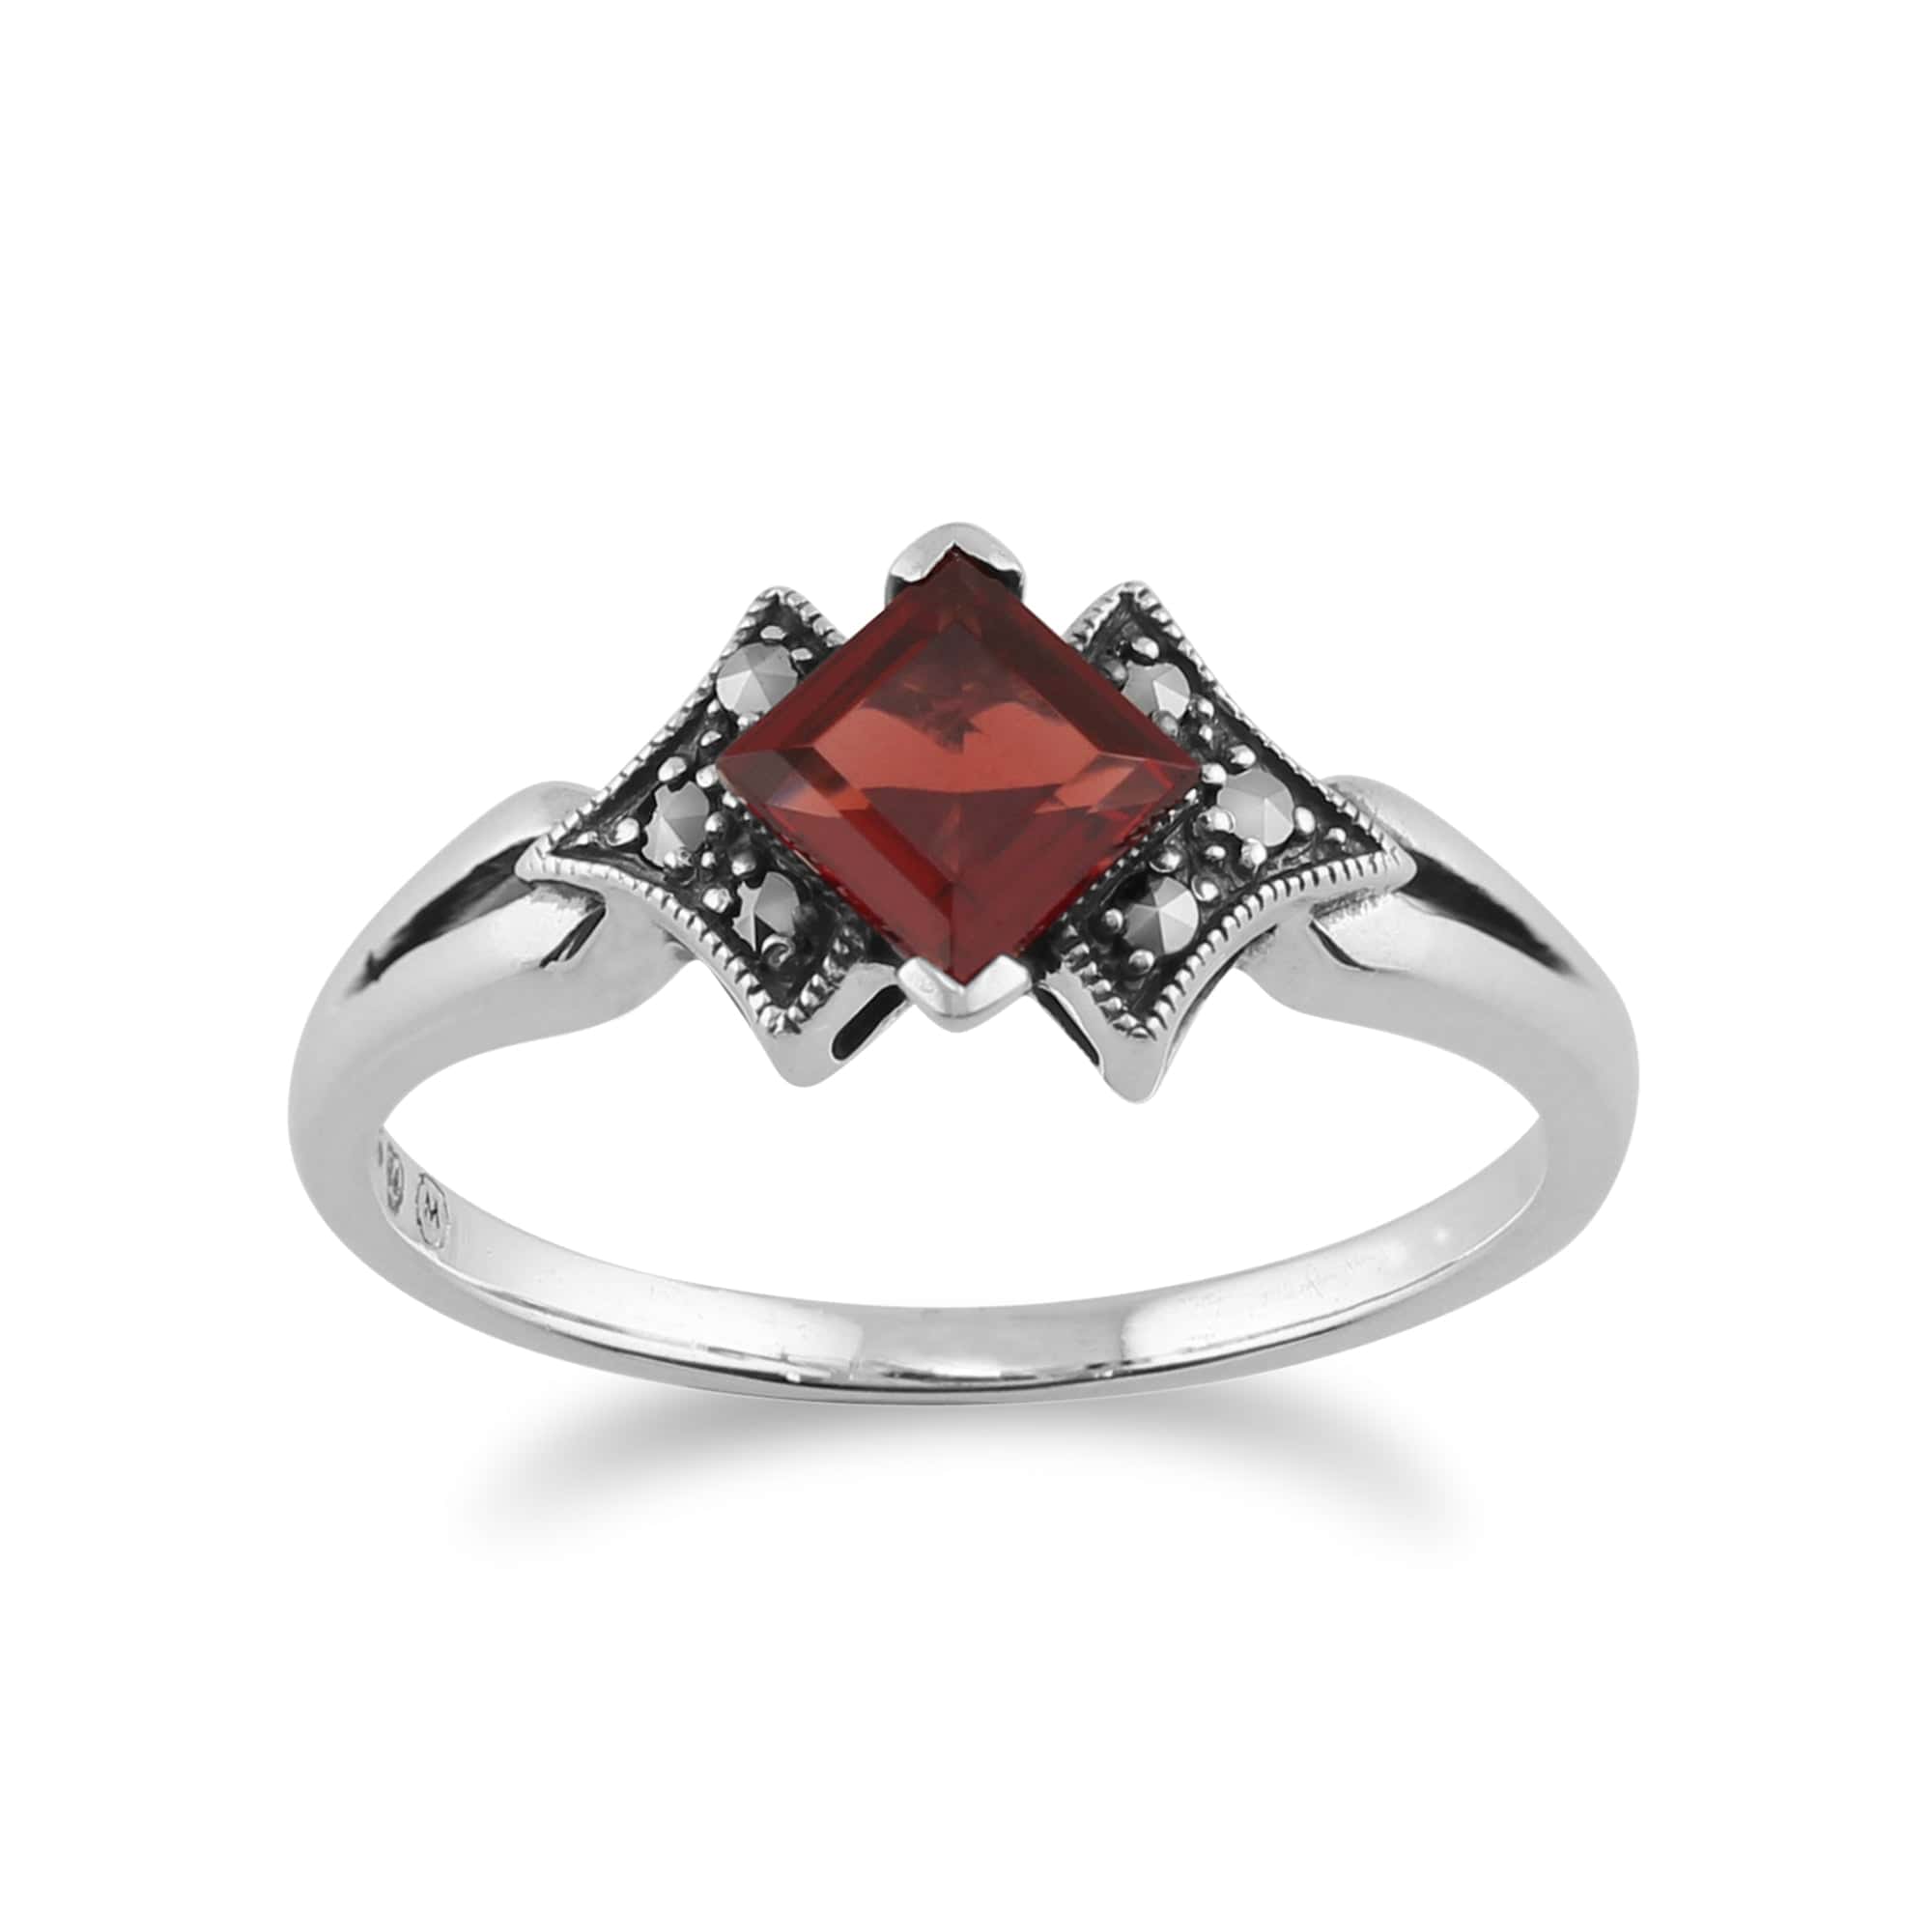 214R393302925 Art Deco Style Square Garnet & Marcasite Ring in 925 Sterling Silver 1